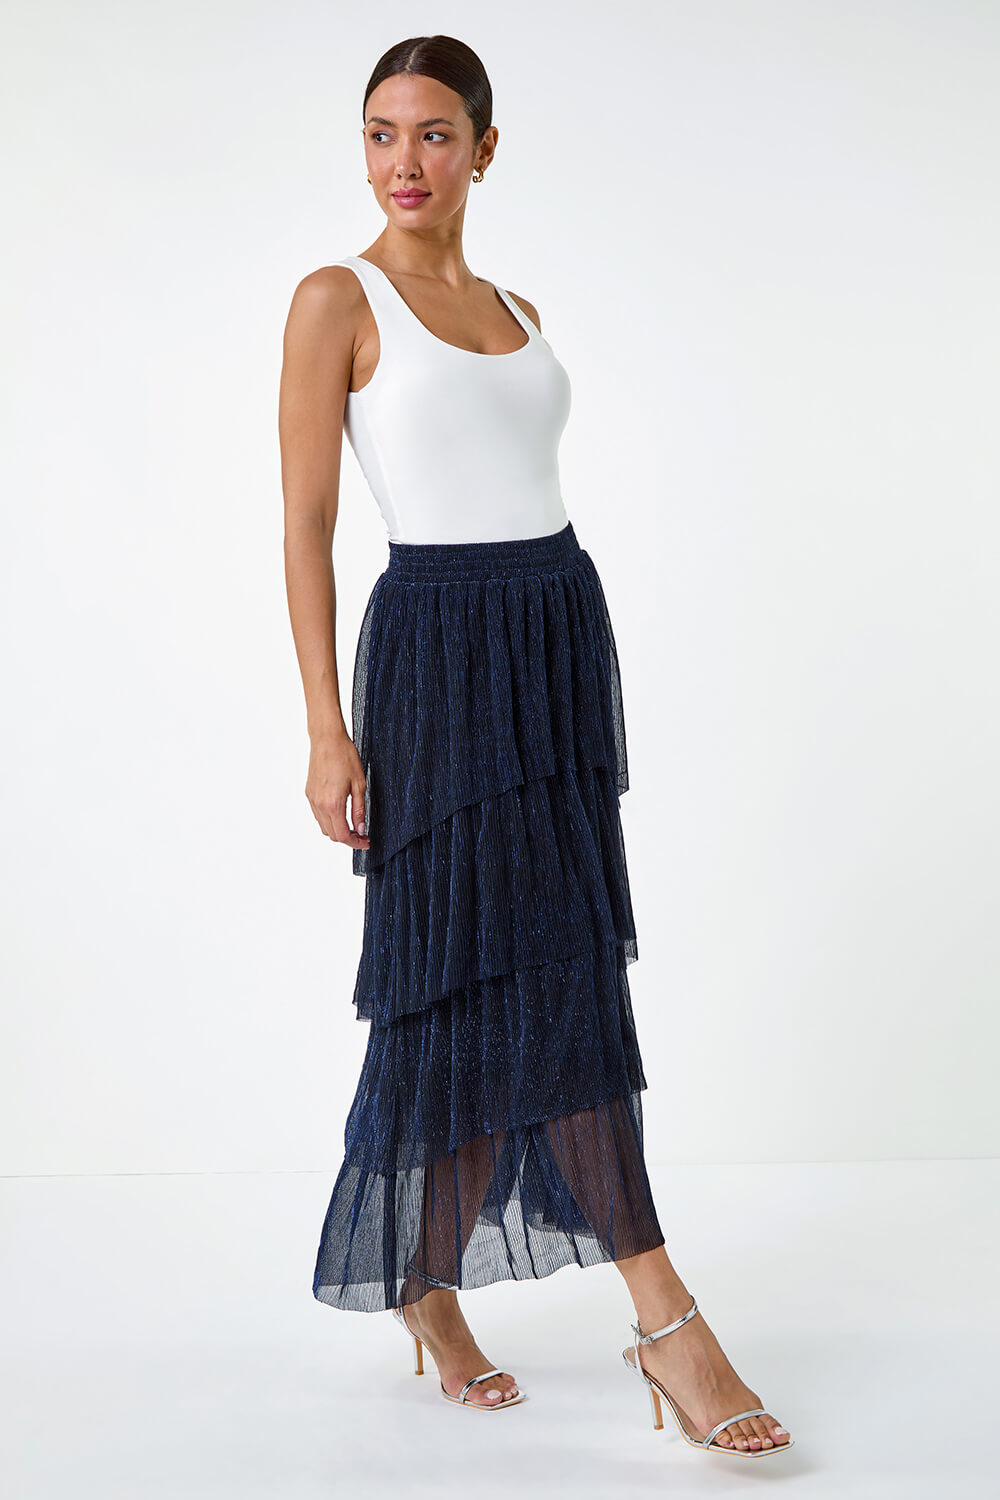 Midnight Blue Shimmer Tiered Mesh Maxi Skirt, Image 3 of 5